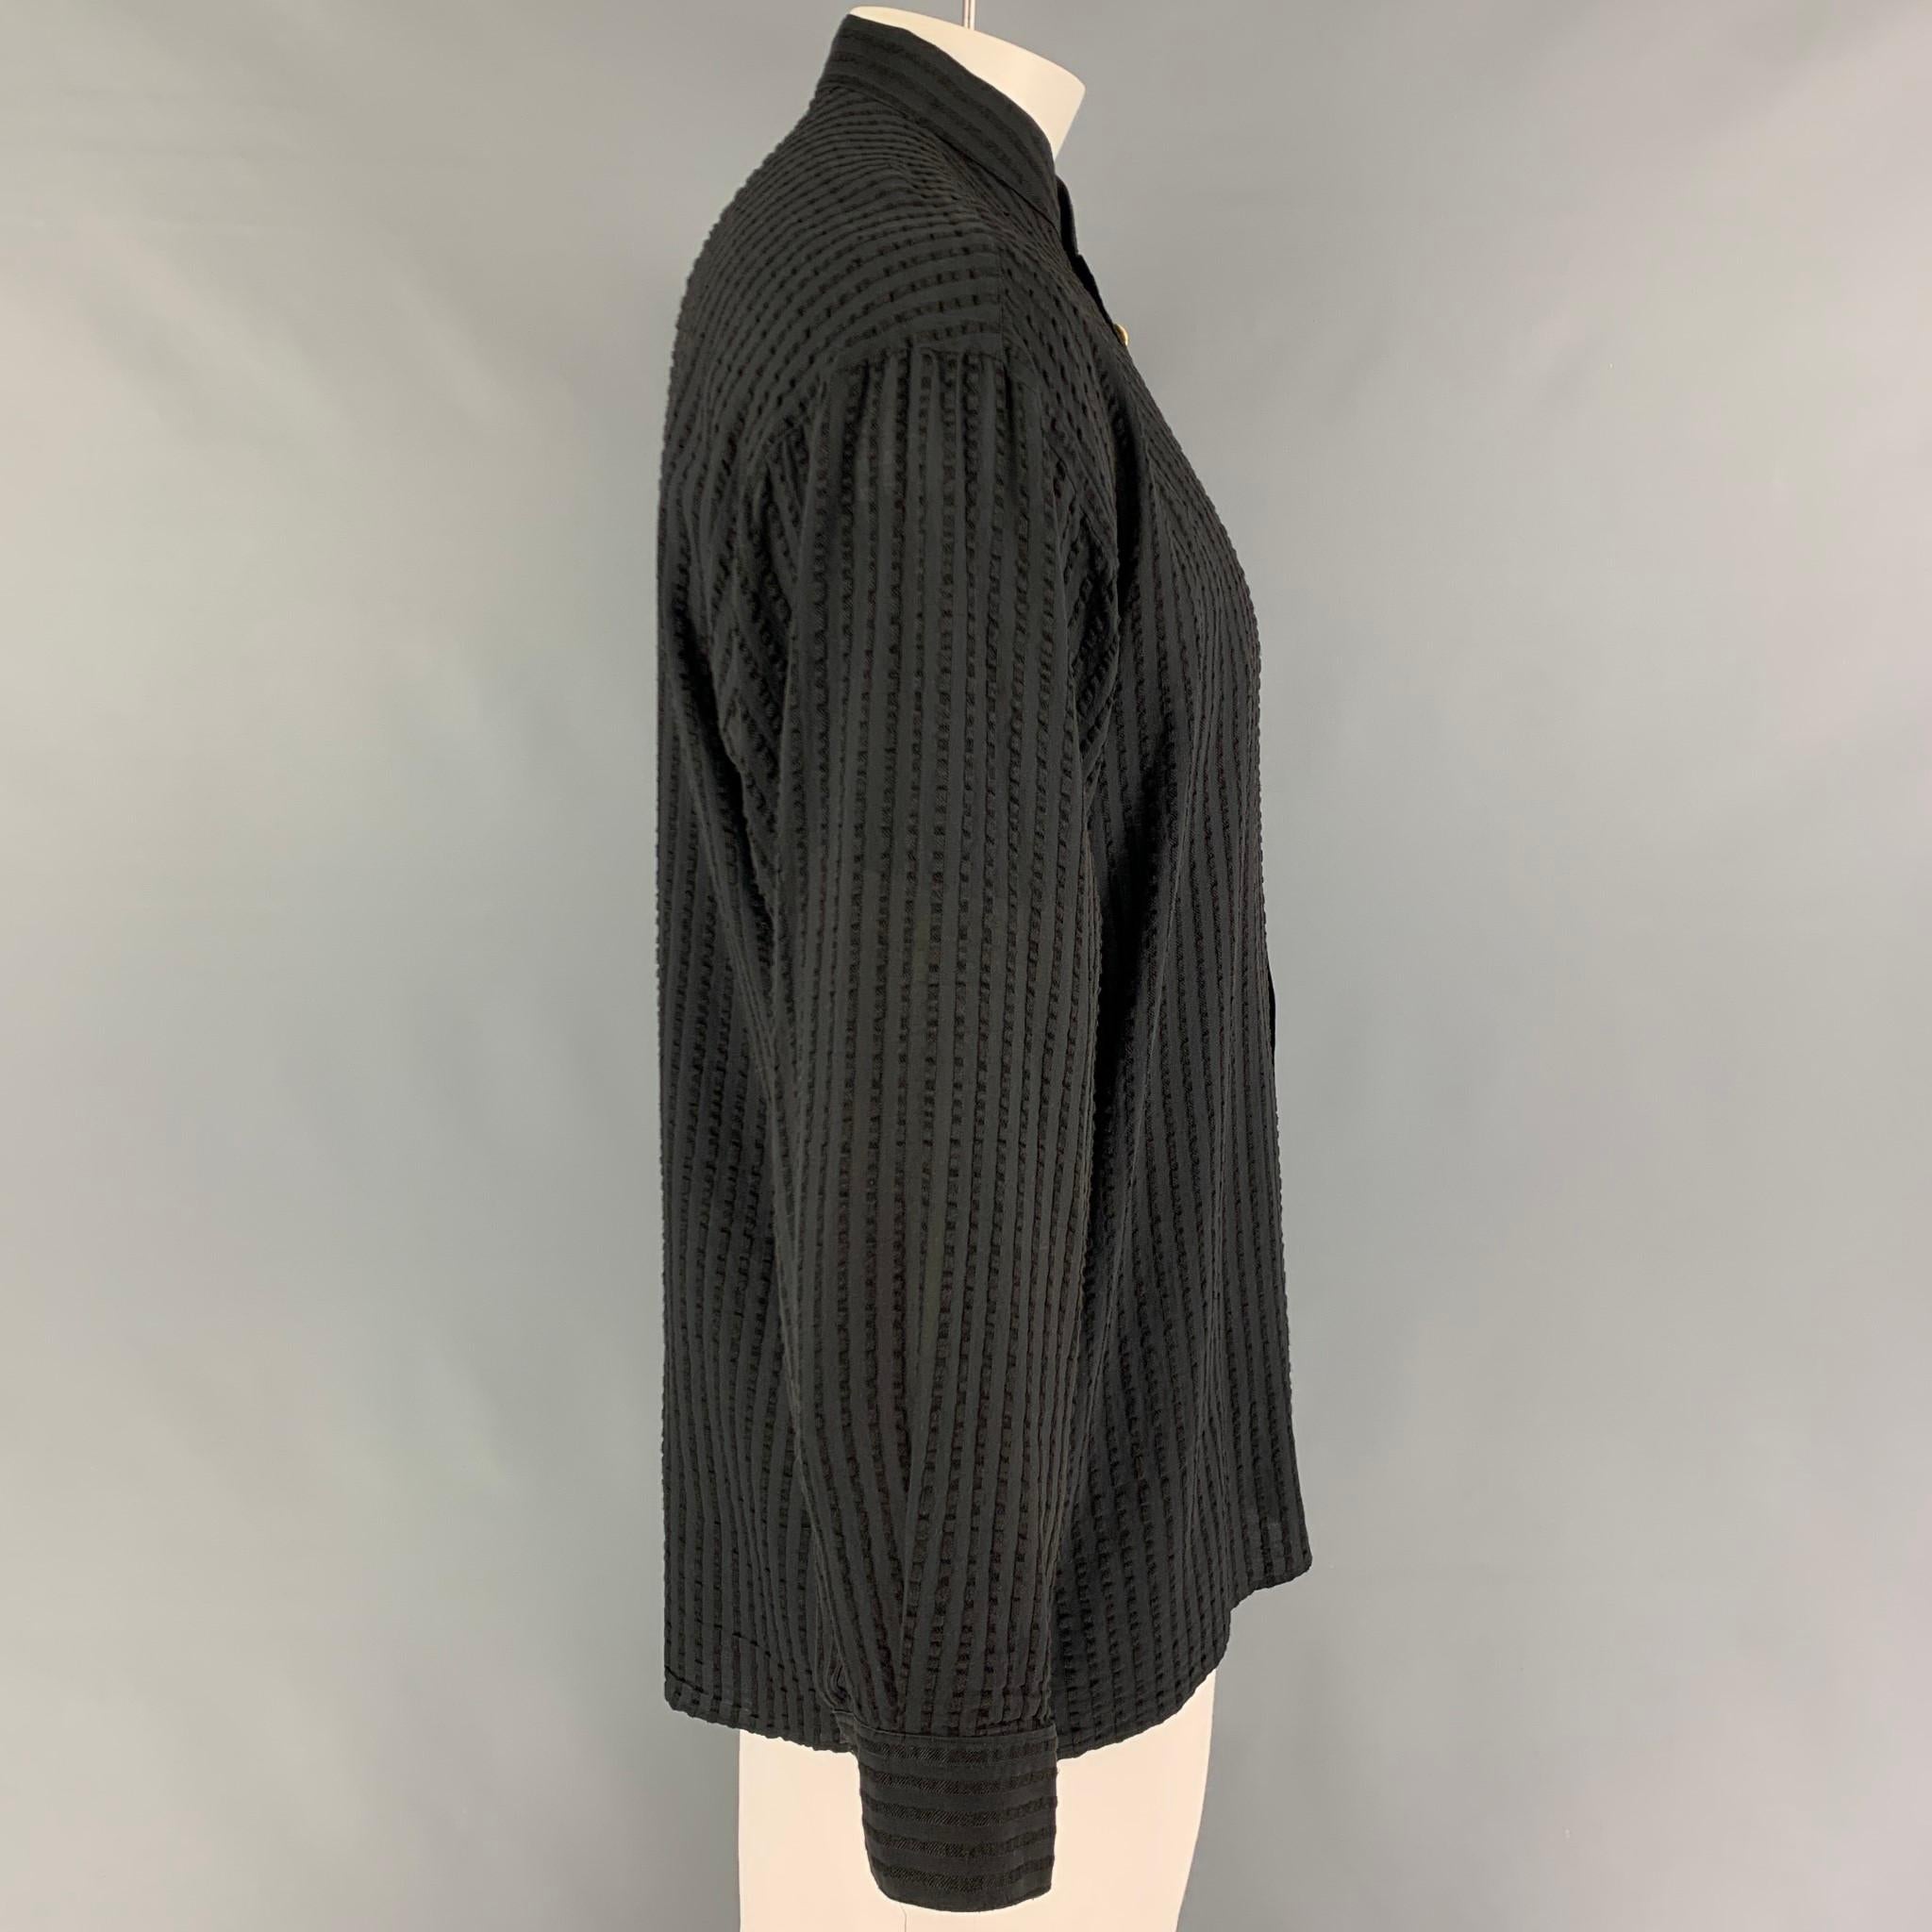 Vintage VERSACE CLASSIC long sleeve shirt comes in a black ribbed material featuring a nehru collar, gold tone buttons, and a button up closure. 

Very Good Pre-Owned Condition. Fabric tag removed.
Marked: Size tag removed

Measurements:

Shoulder: